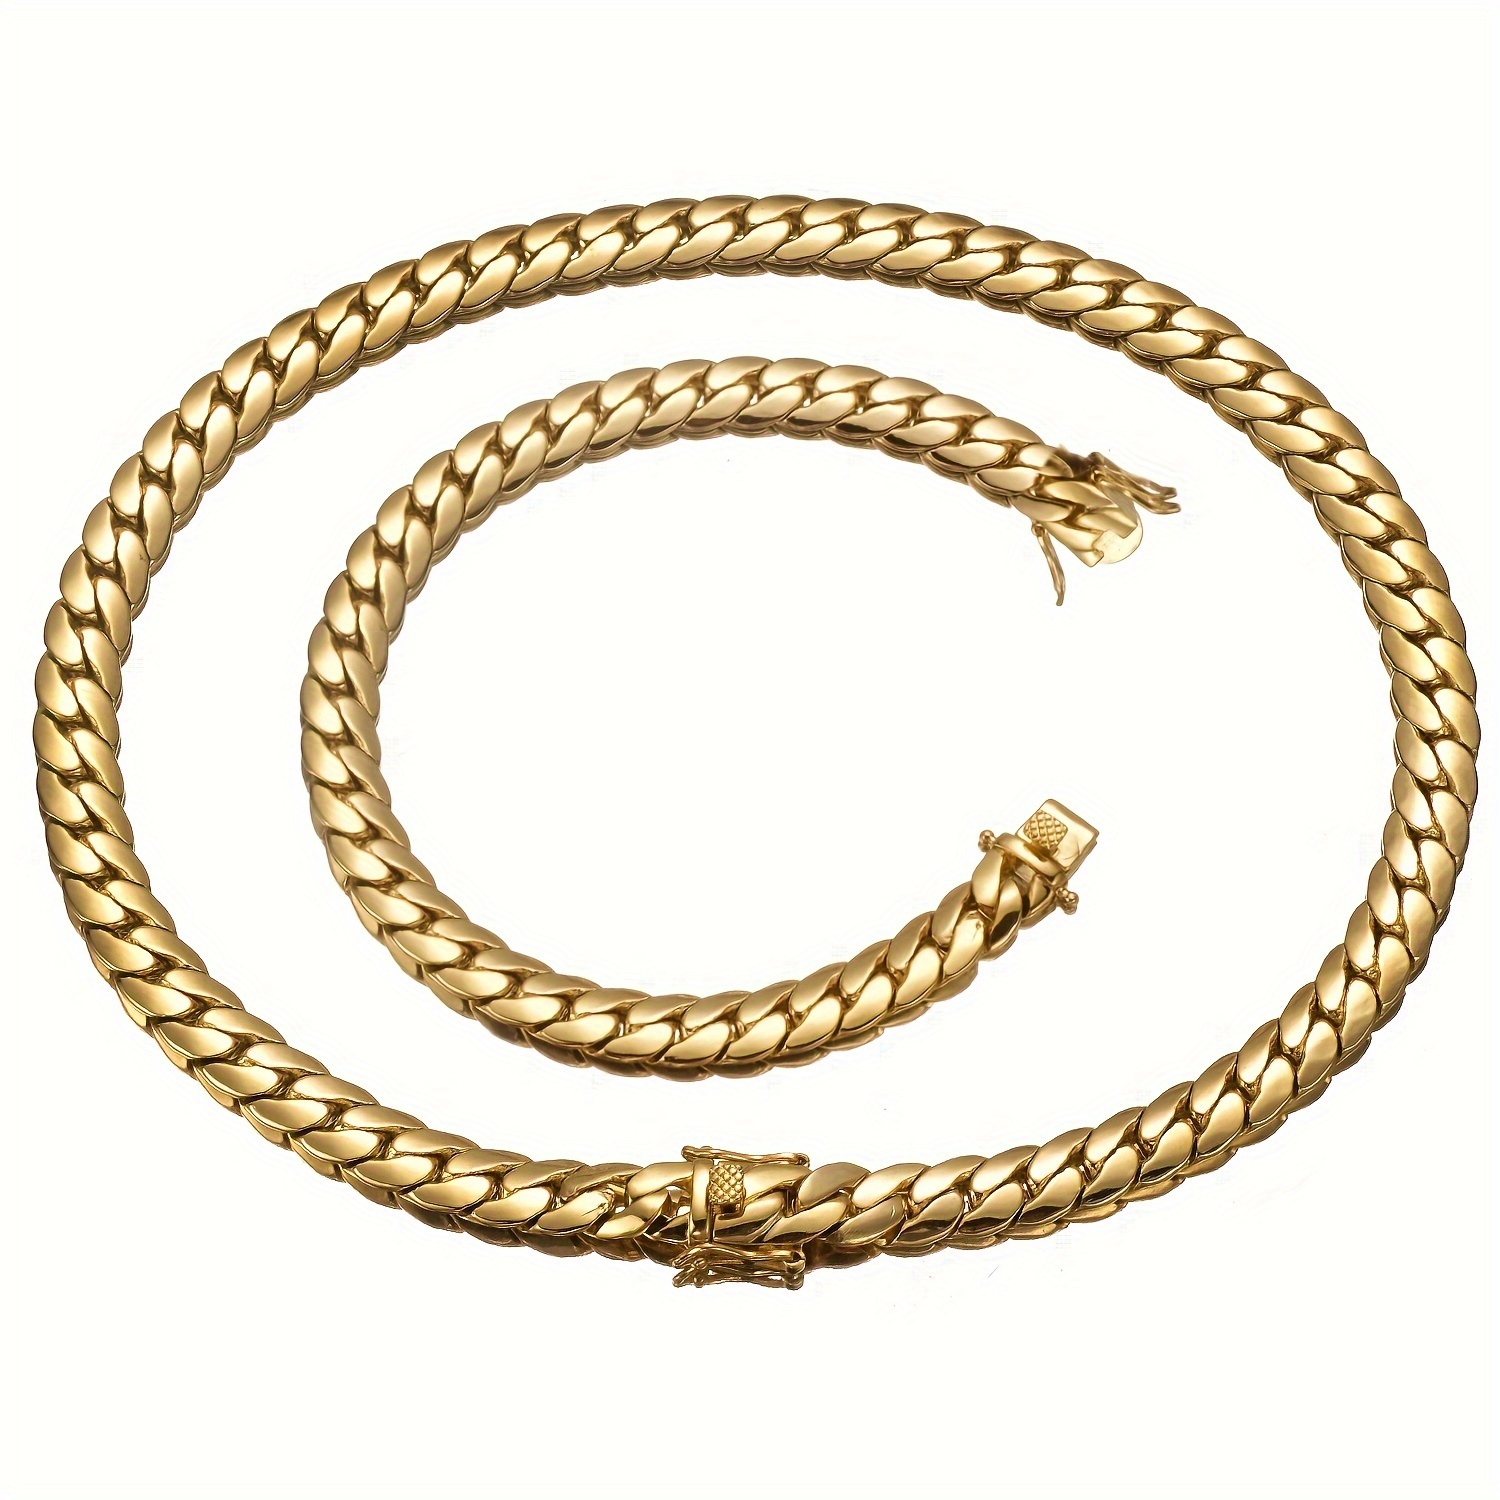 

2pcs Thick Plated Hip Hop Jewelry Stainless Steel Men 10mm Cuban Link Chain Whip Necklace Bracelet Set